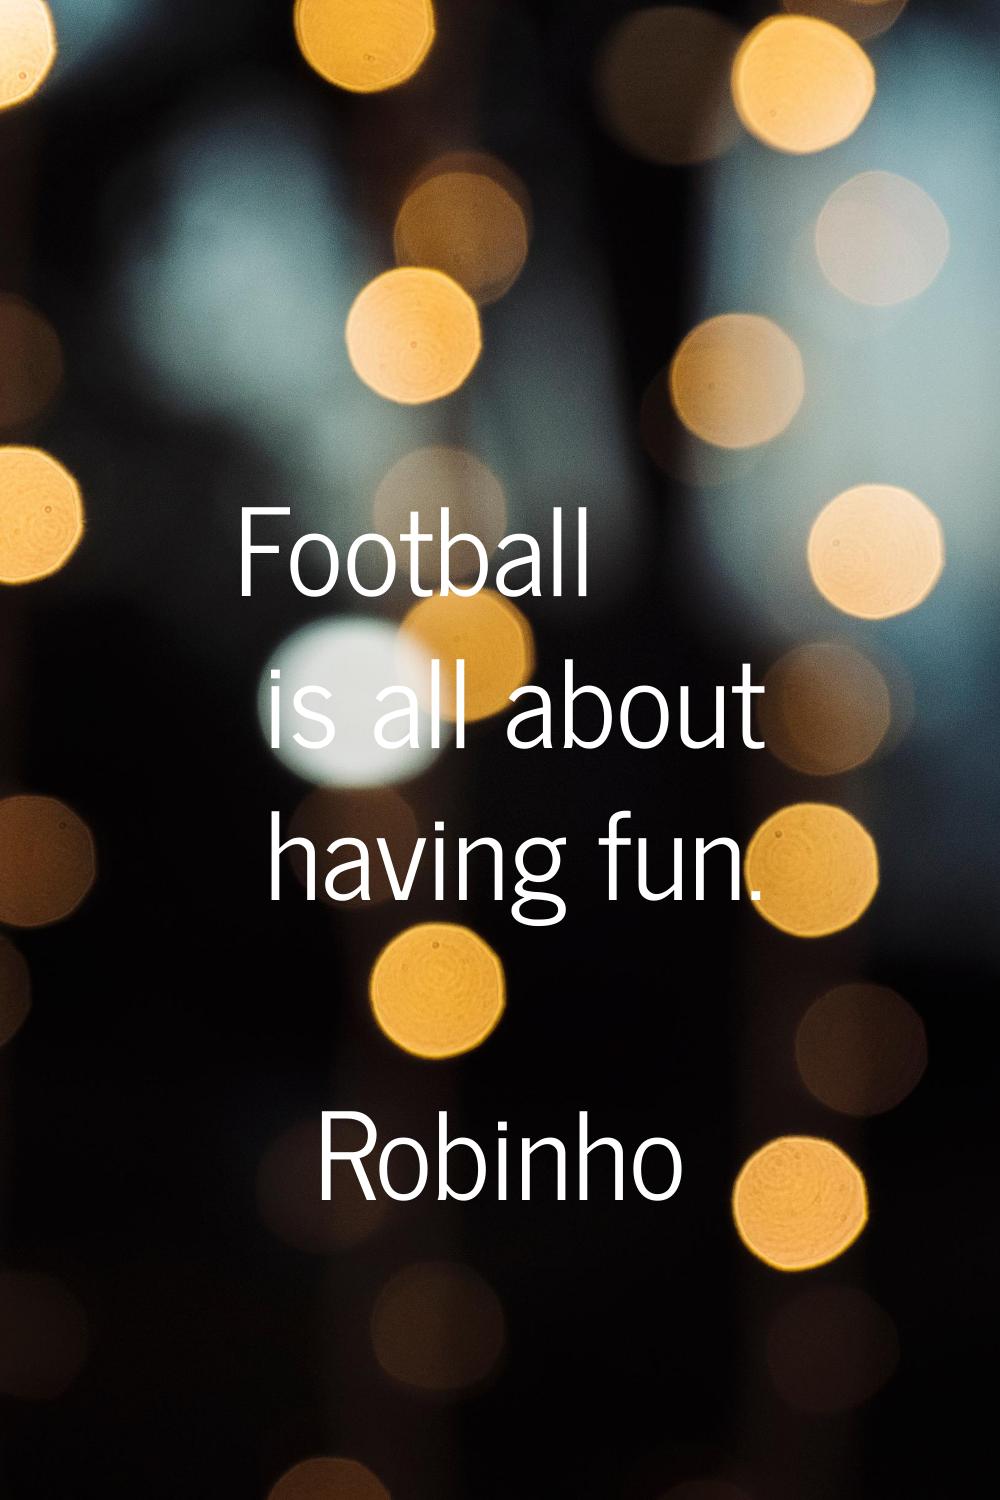 Football is all about having fun.